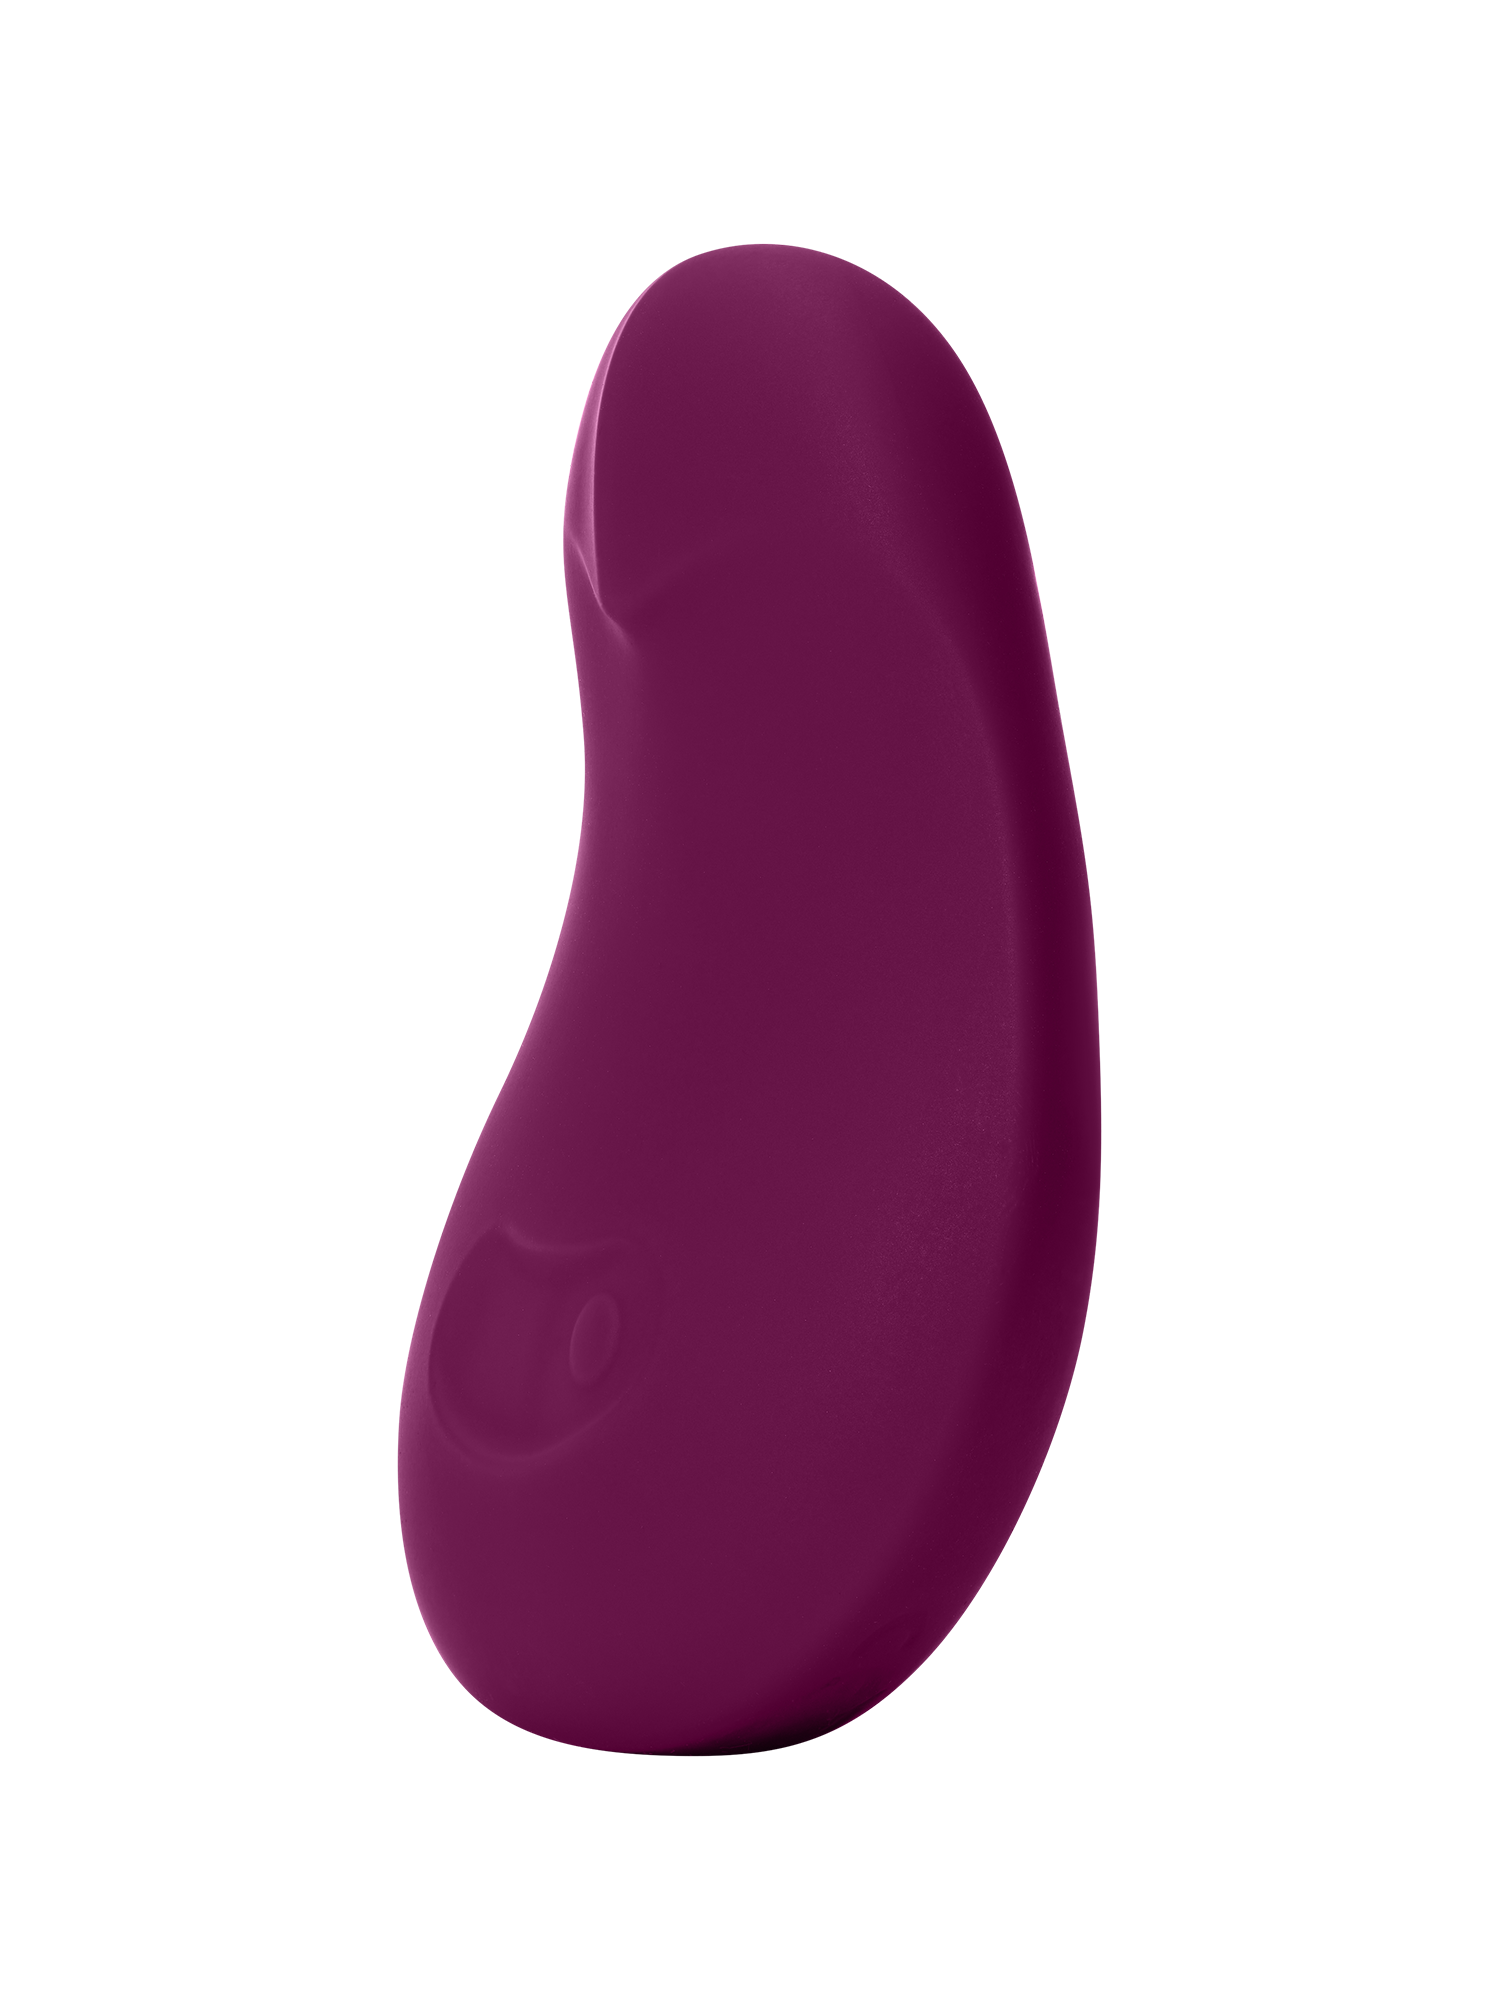 Plum | Seamless | A deep purple, pebble shaped vibrator Pom from the side on an off-white background